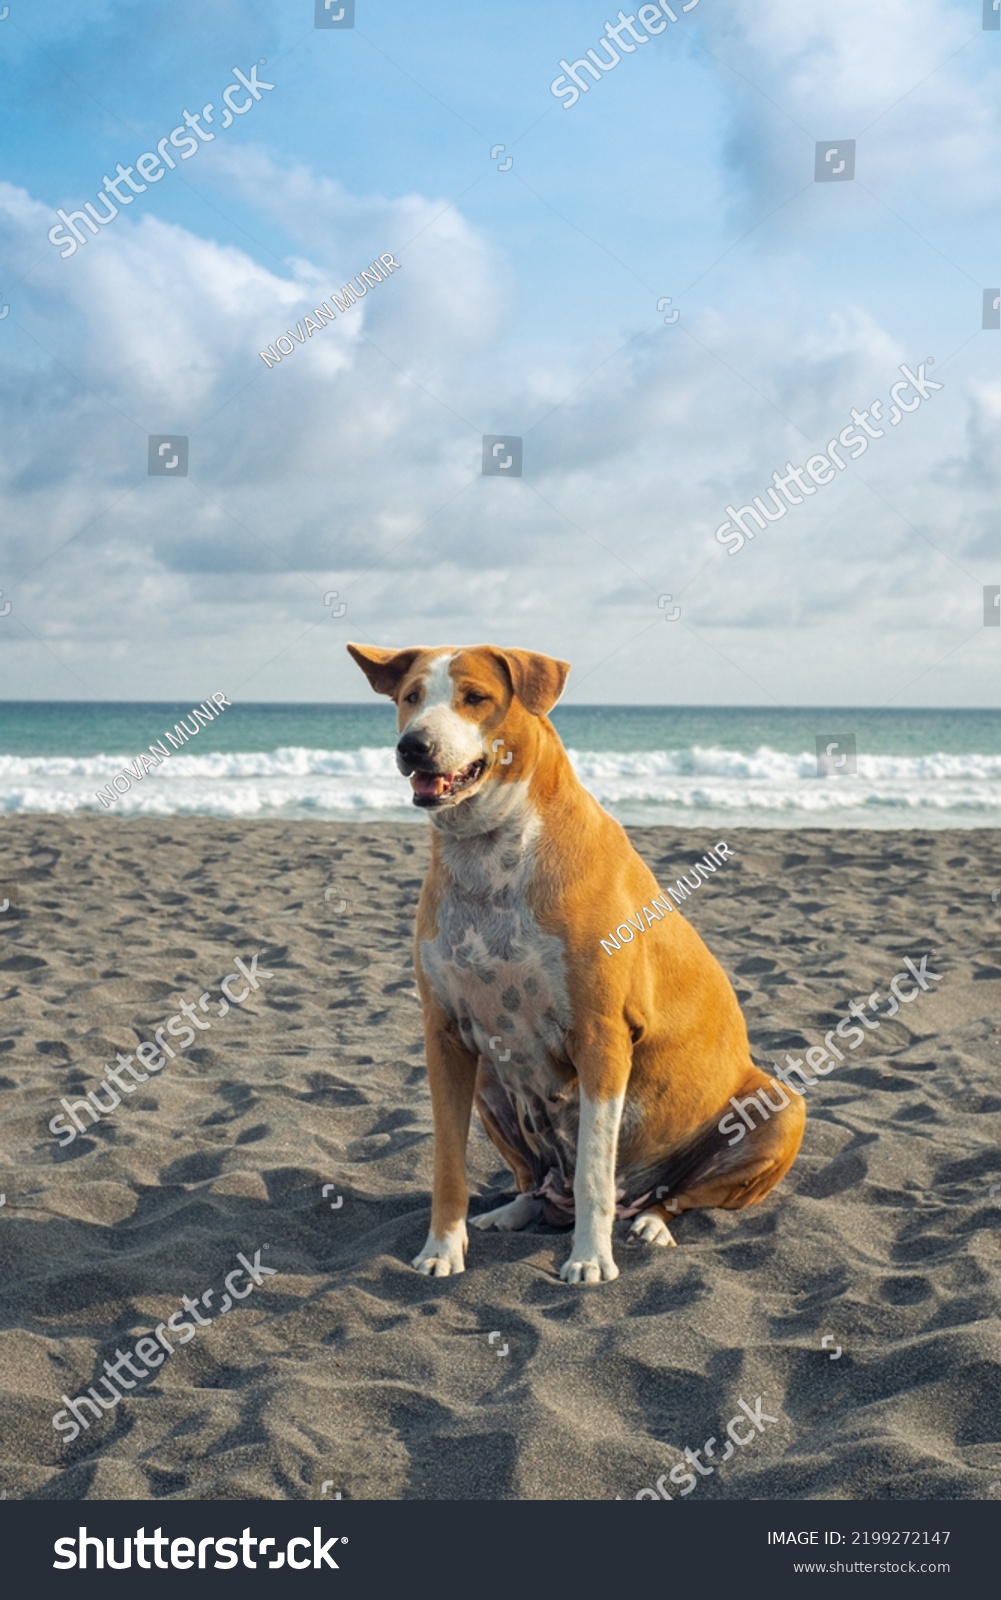 Portray of a dog enjoying her life on the beach before sunset. #2199272147